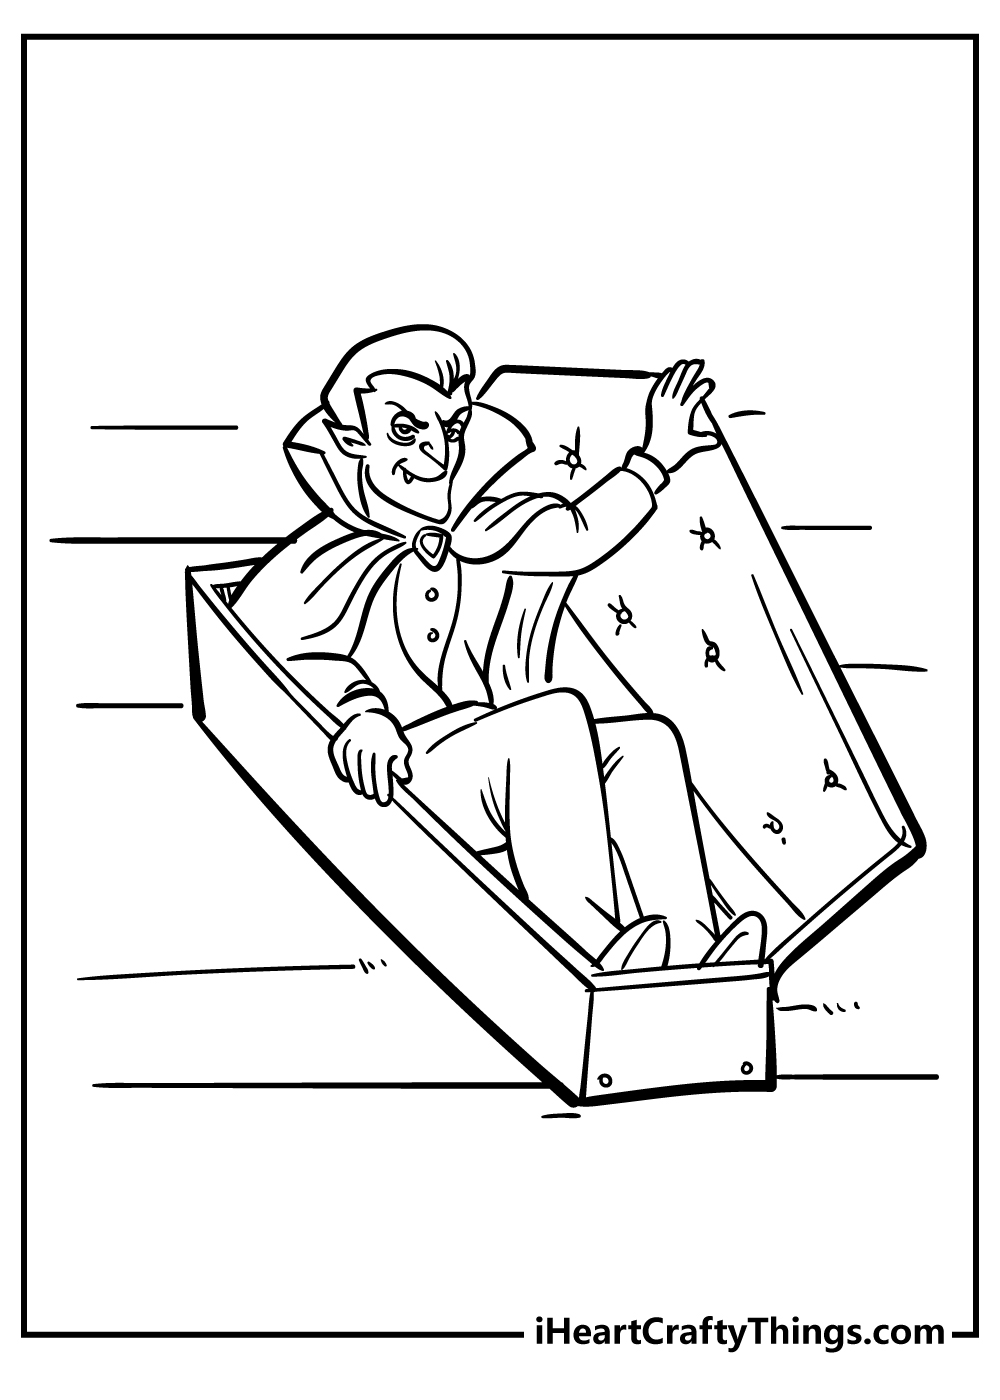 Vampire Coloring Pages for kids free download